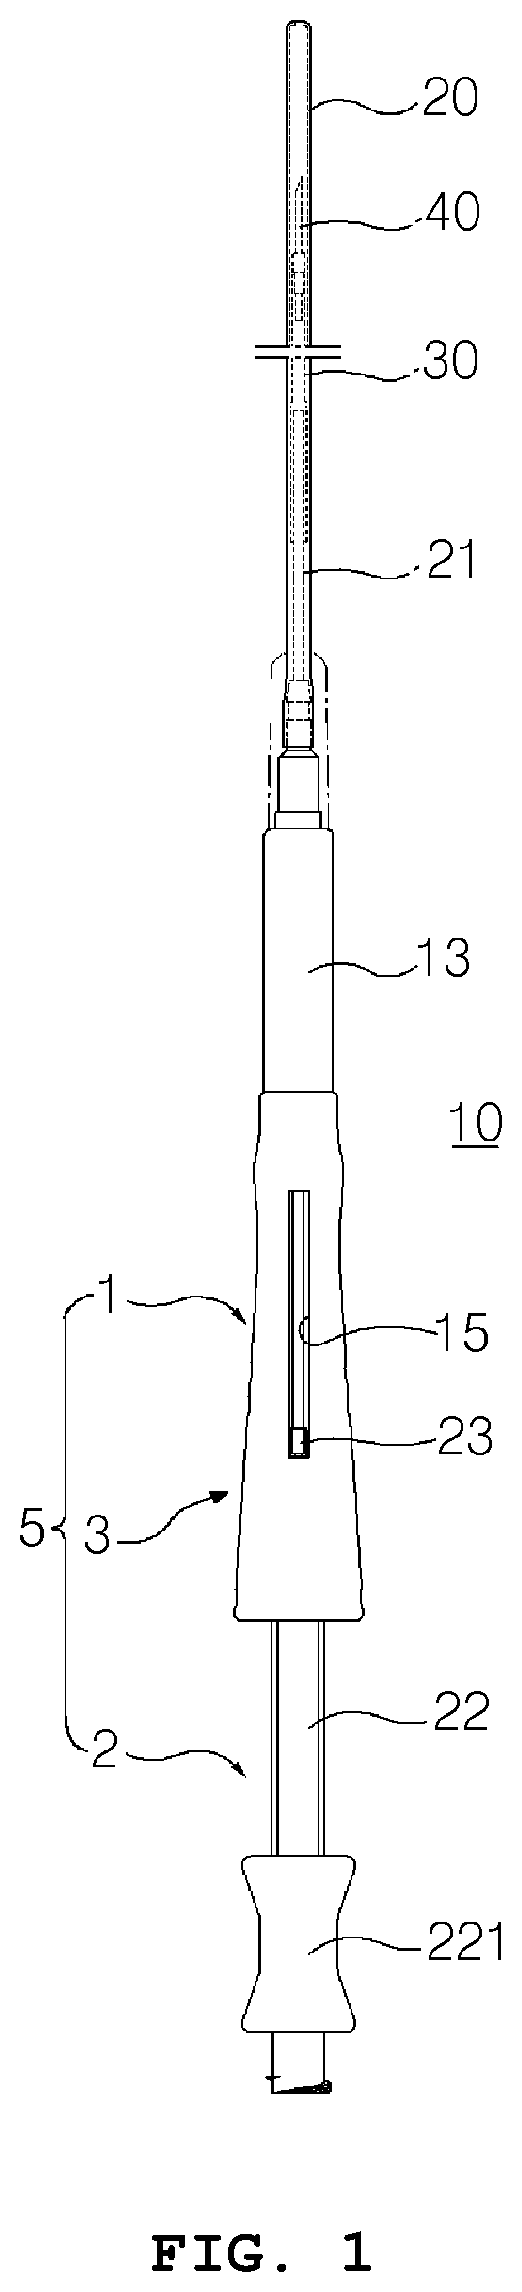 Endoscopic treatment instrument having an inner and outer tube